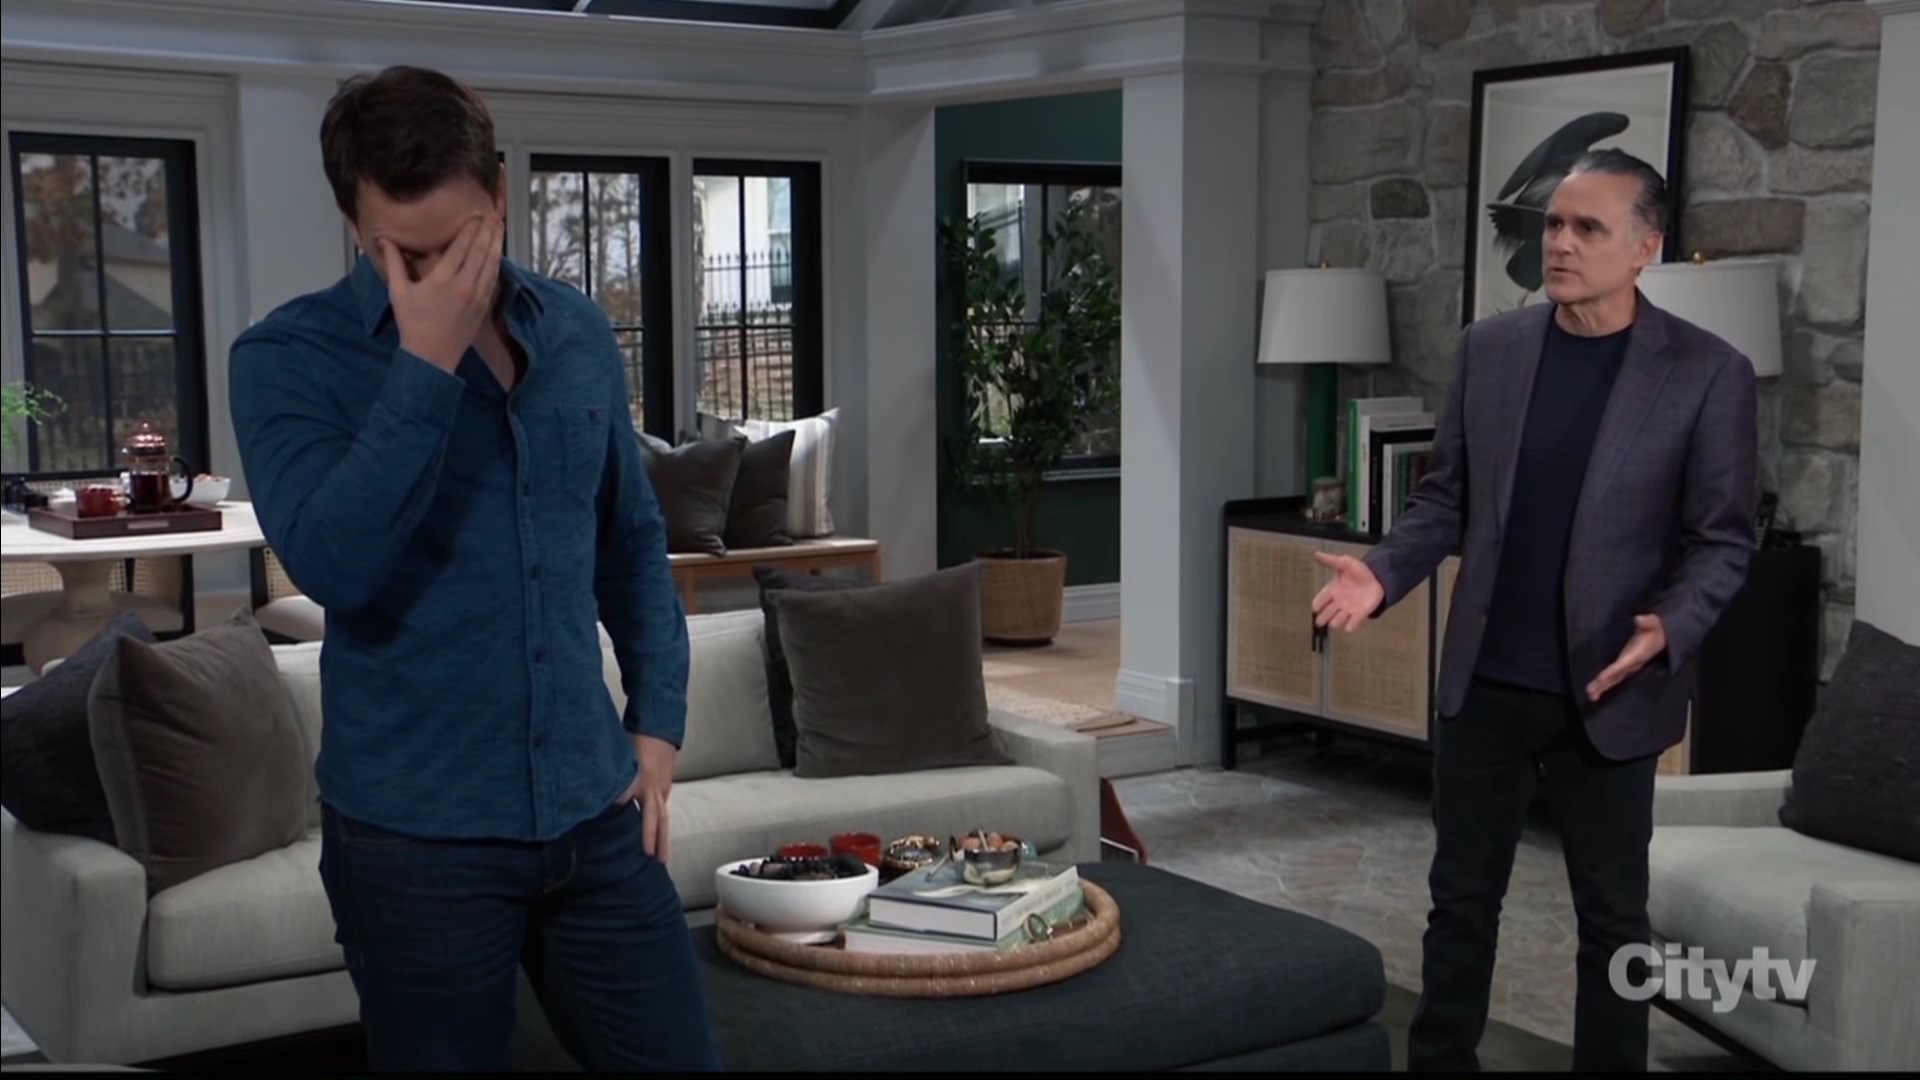 sonny and michael talk about willow dying GH recaps